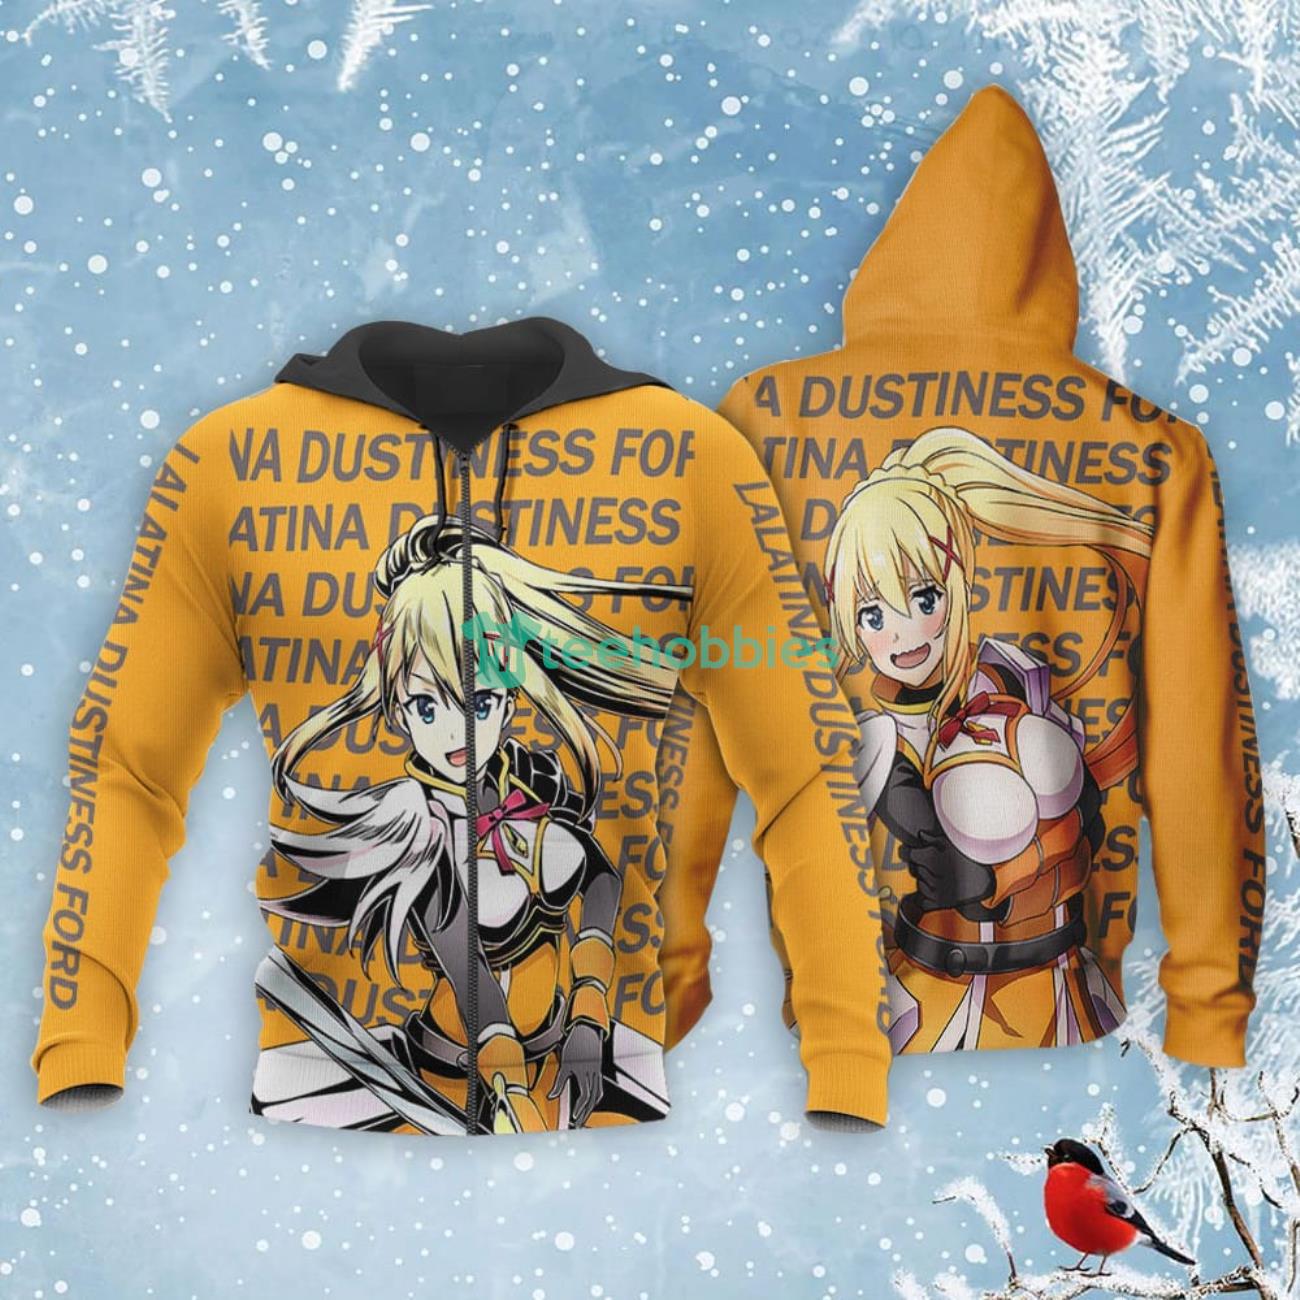 Lalatina Dustiness Ford All Over Printed 3D Shirt KonoSuba Custom Anime Fans For Fans Product Photo 1 Product photo 1